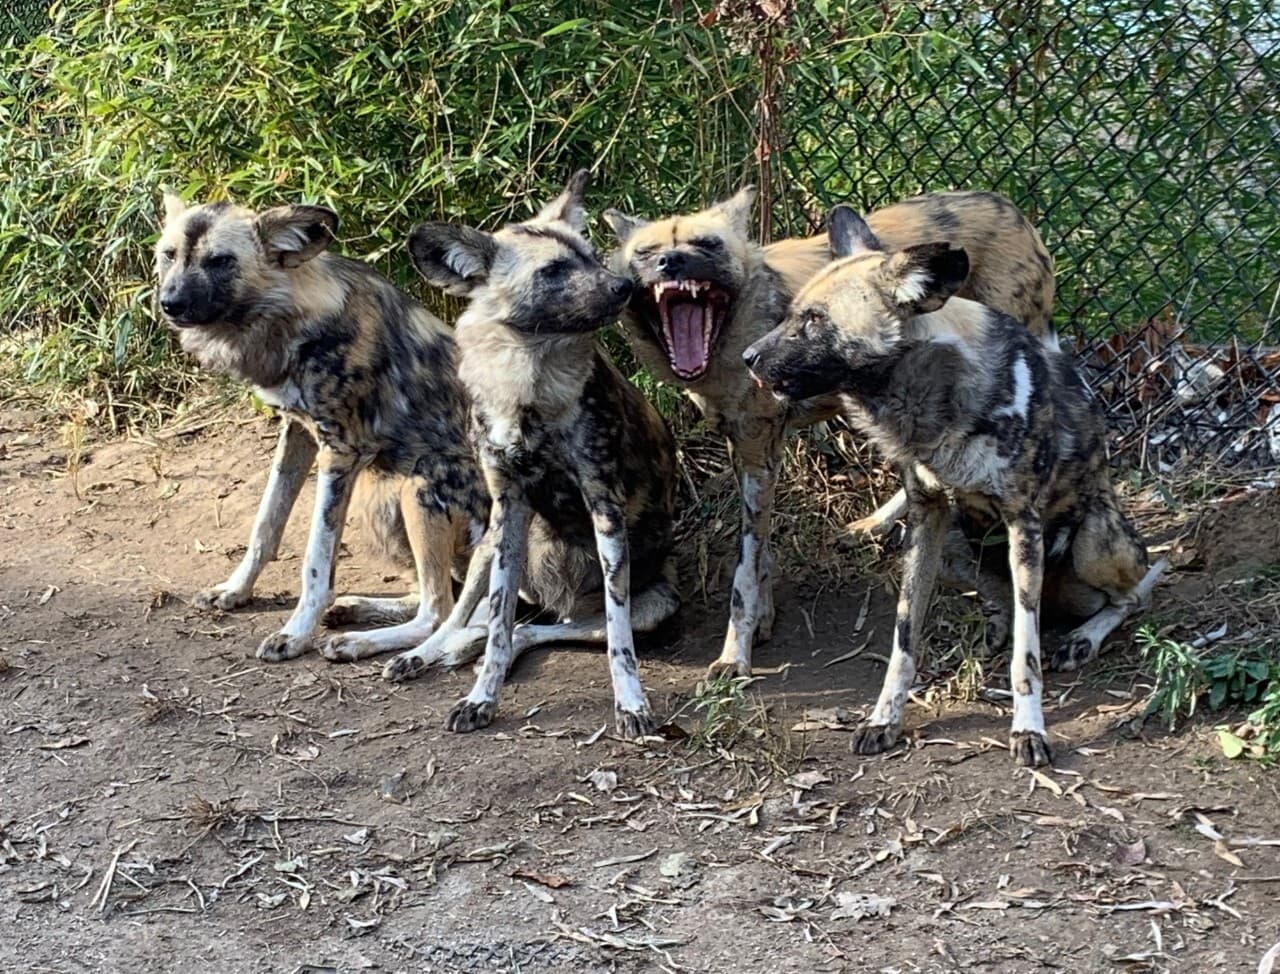 African Painted Dogs at the Zoo